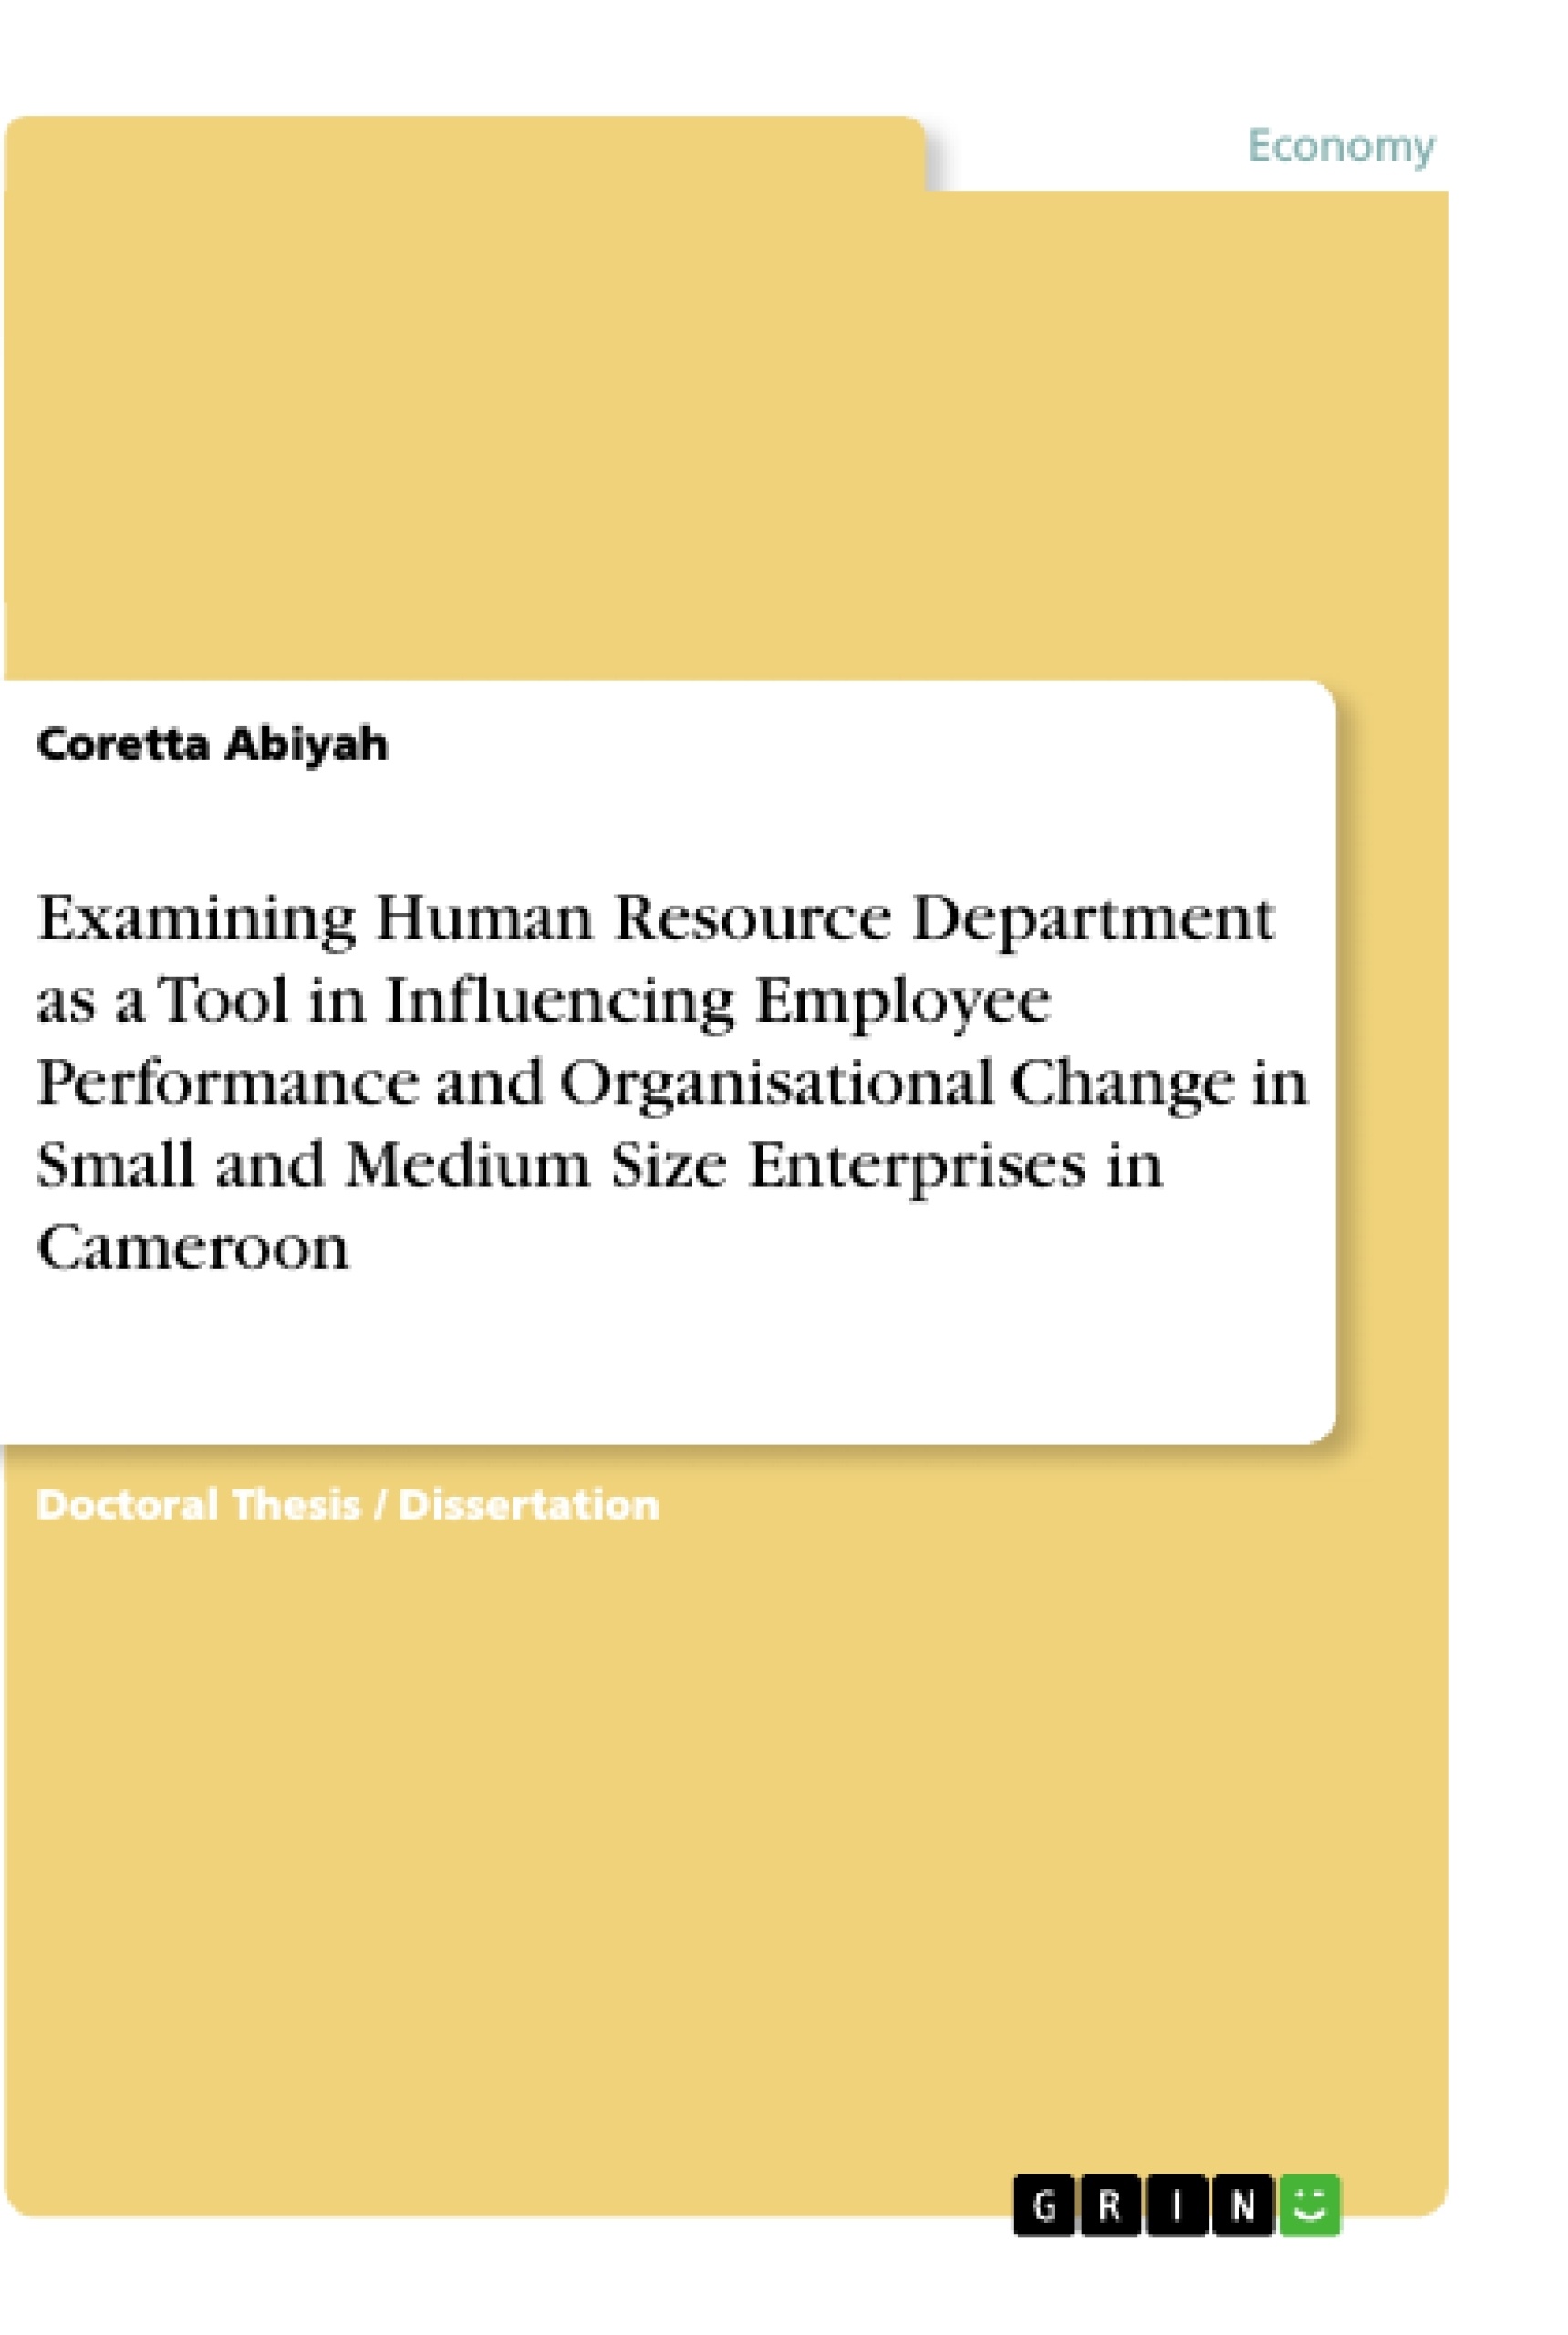 Title: Examining Human Resource Department as a Tool in Influencing Employee Performance and Organisational Change in Small and Medium Size Enterprises in Cameroon